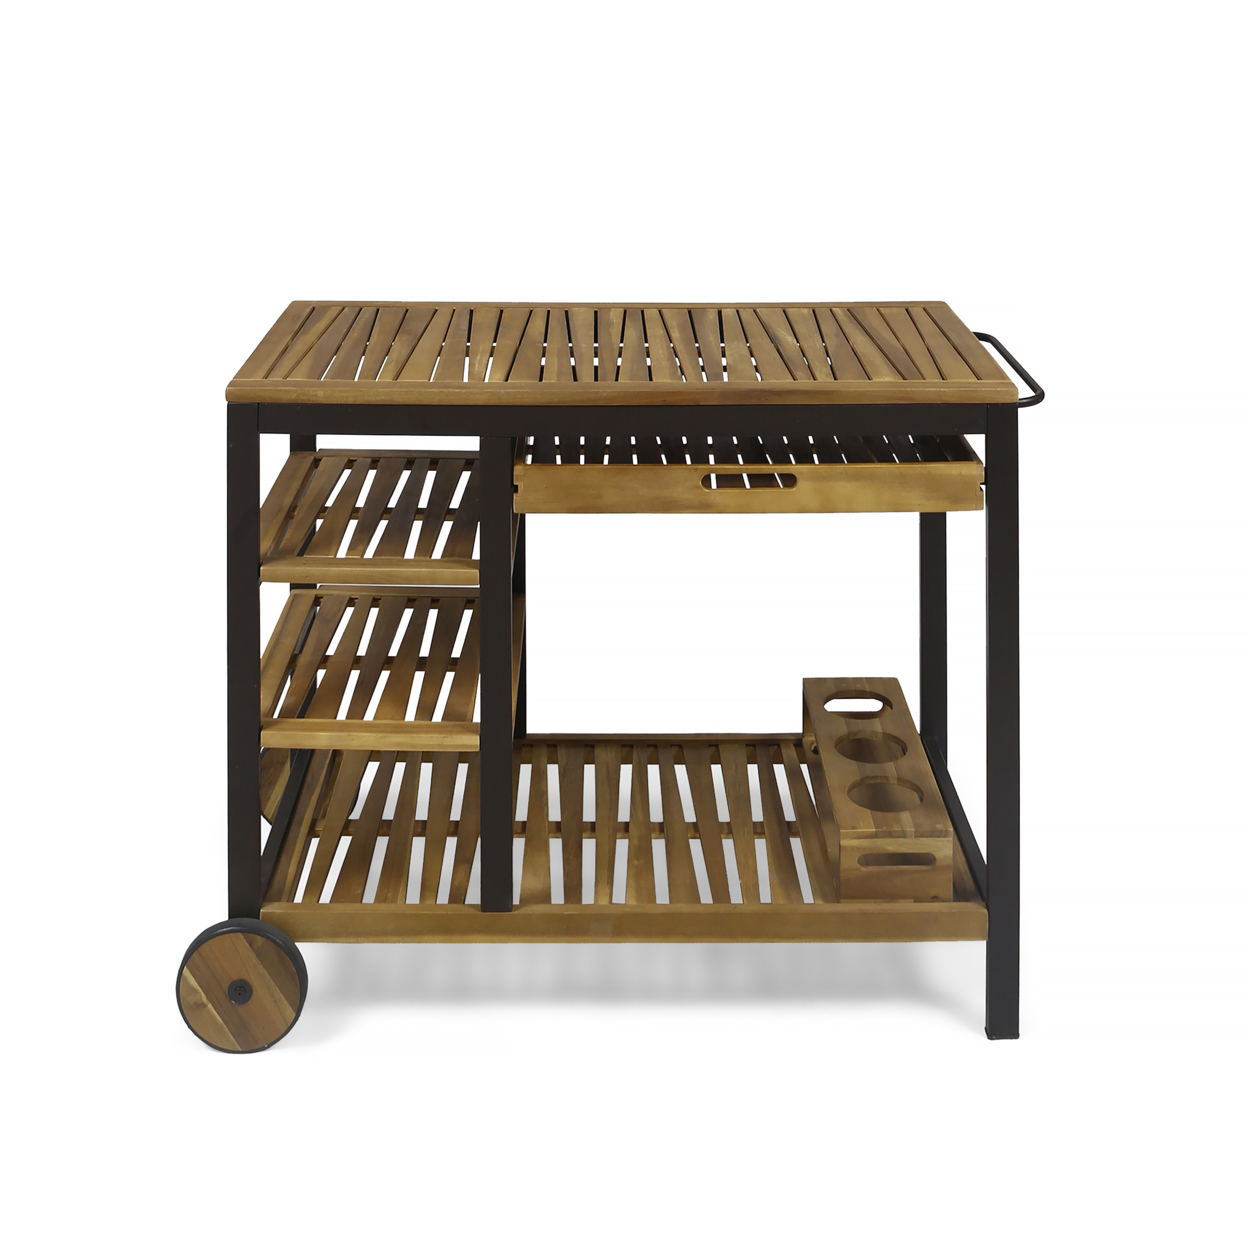 Ishtar Indoor Wood And Iron Bar Cart With Drawers And Wine Bottle Holders